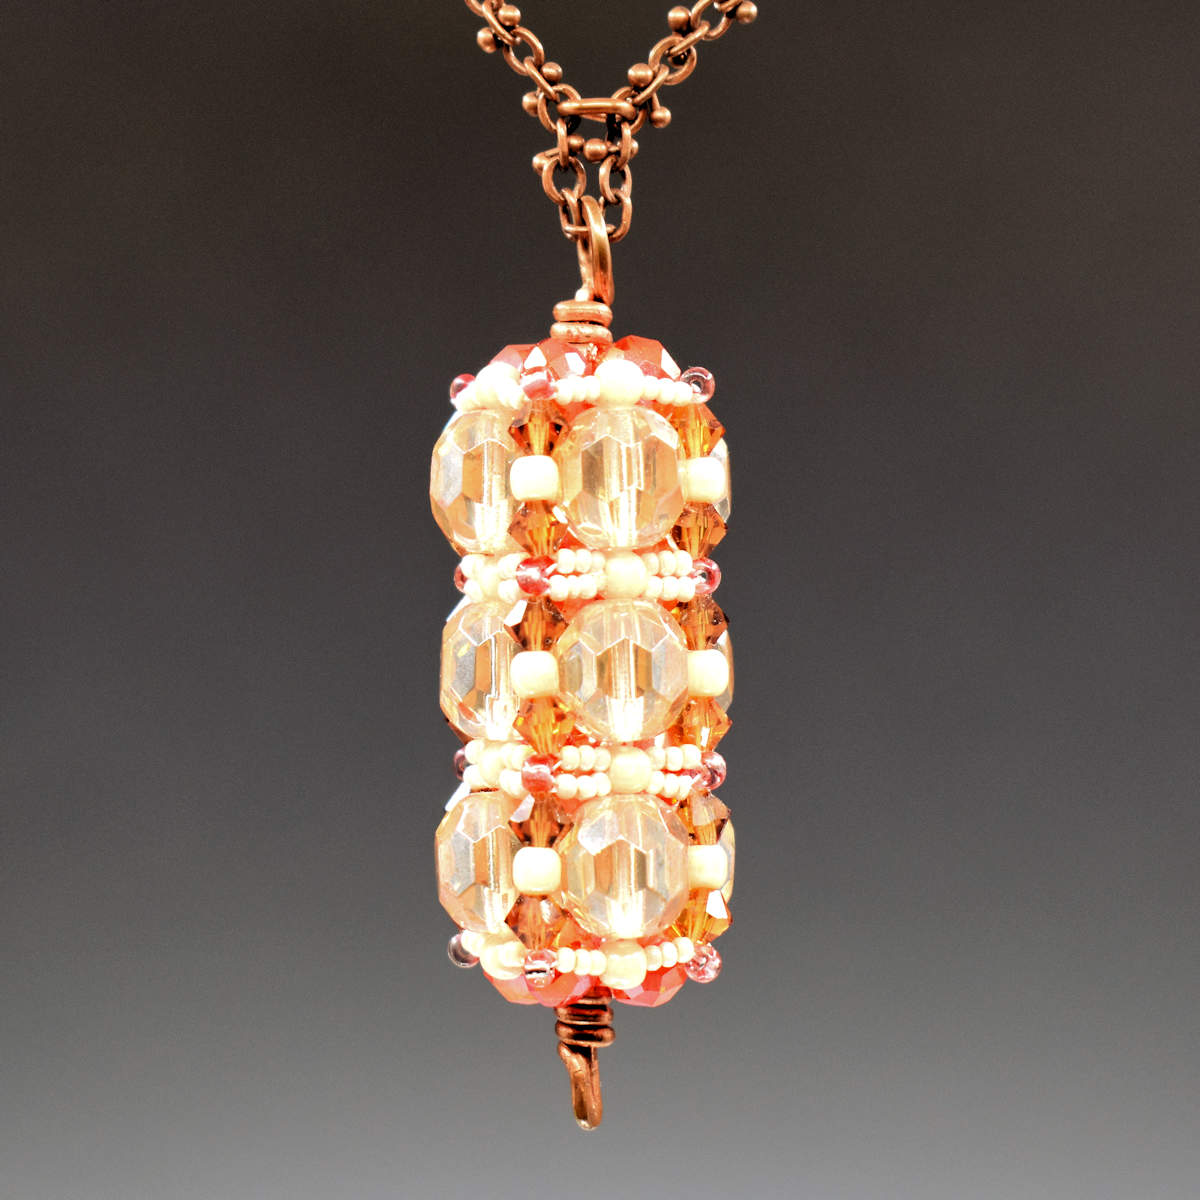 A peachy colored pendant hangs from copper chain. The pendant has three rows of pale yellowy peach with horizontal rows of cream seed beads between them. There is a vertical row of orange crystal beads that runs between the largest peachy yellow beads. 